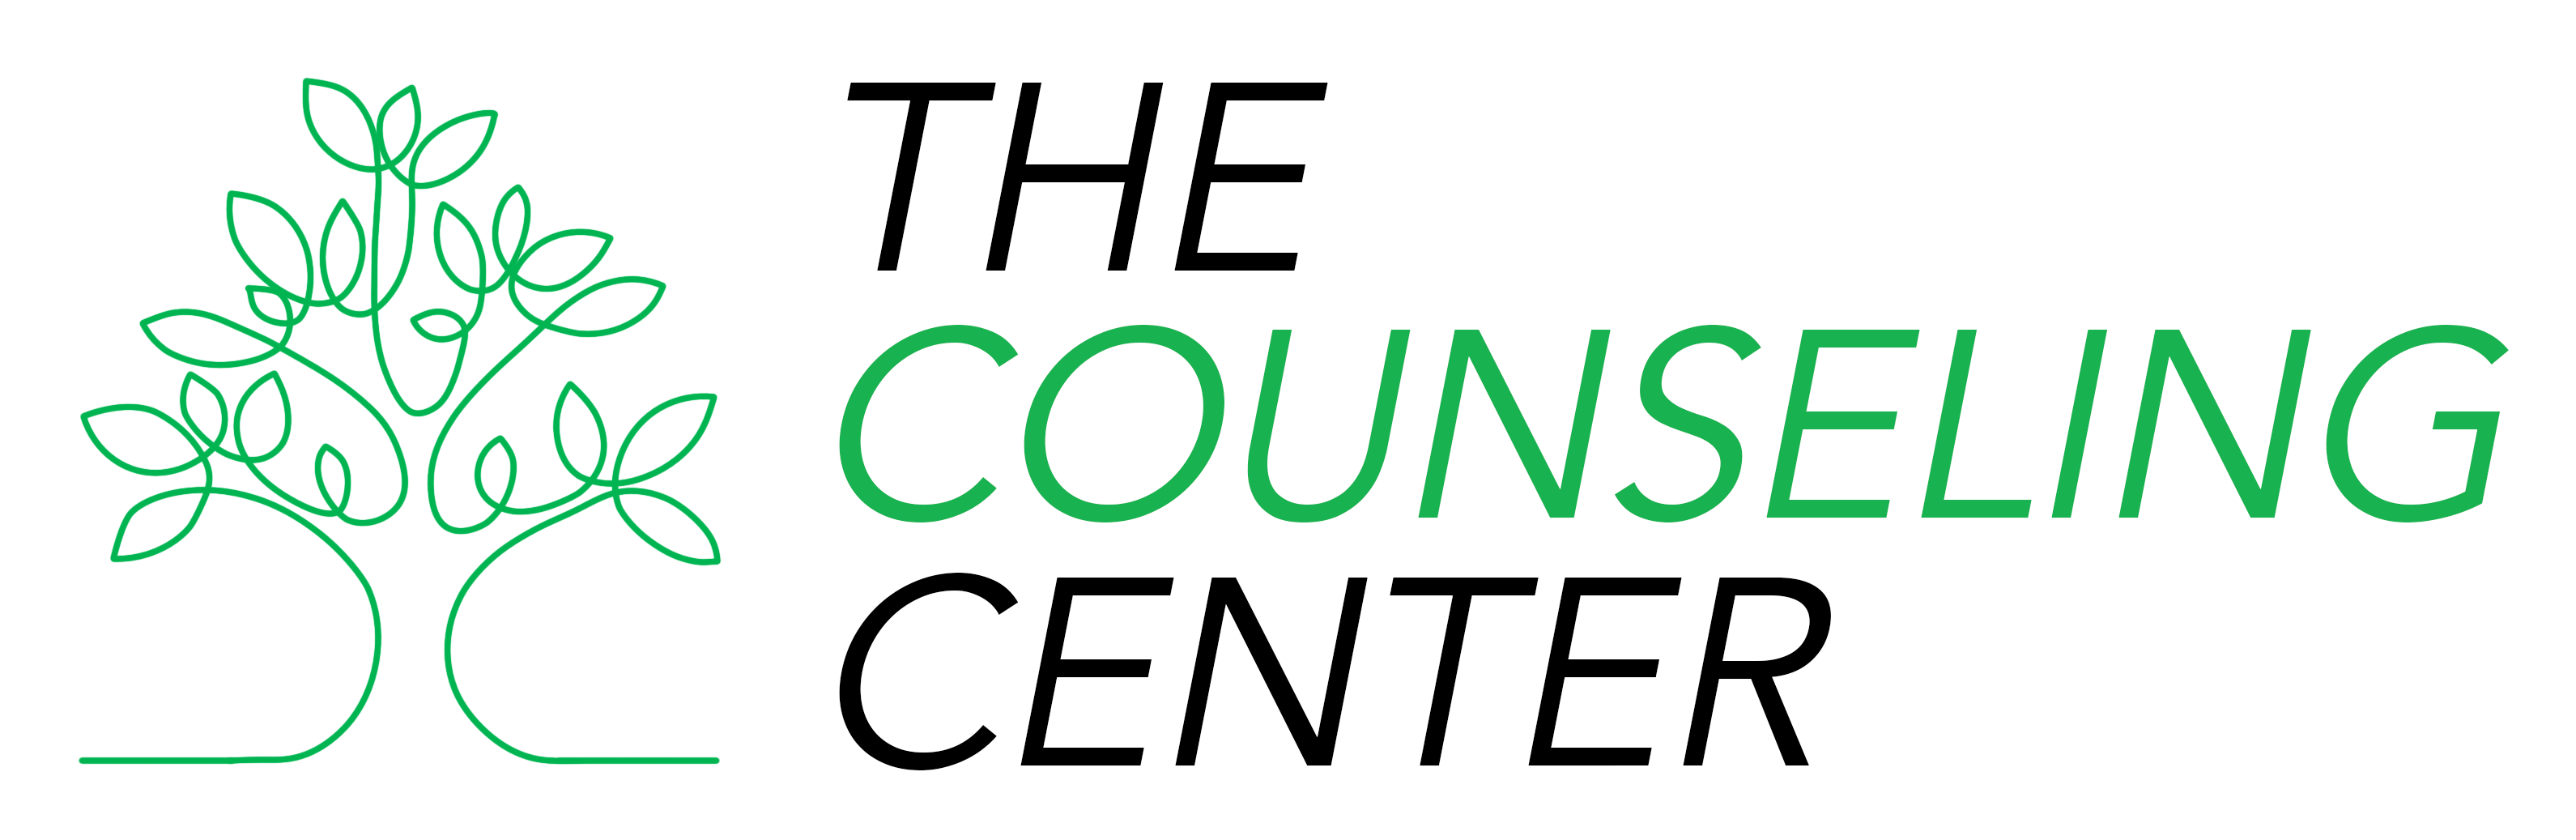 The Counseling Center at Tree City, Inc.